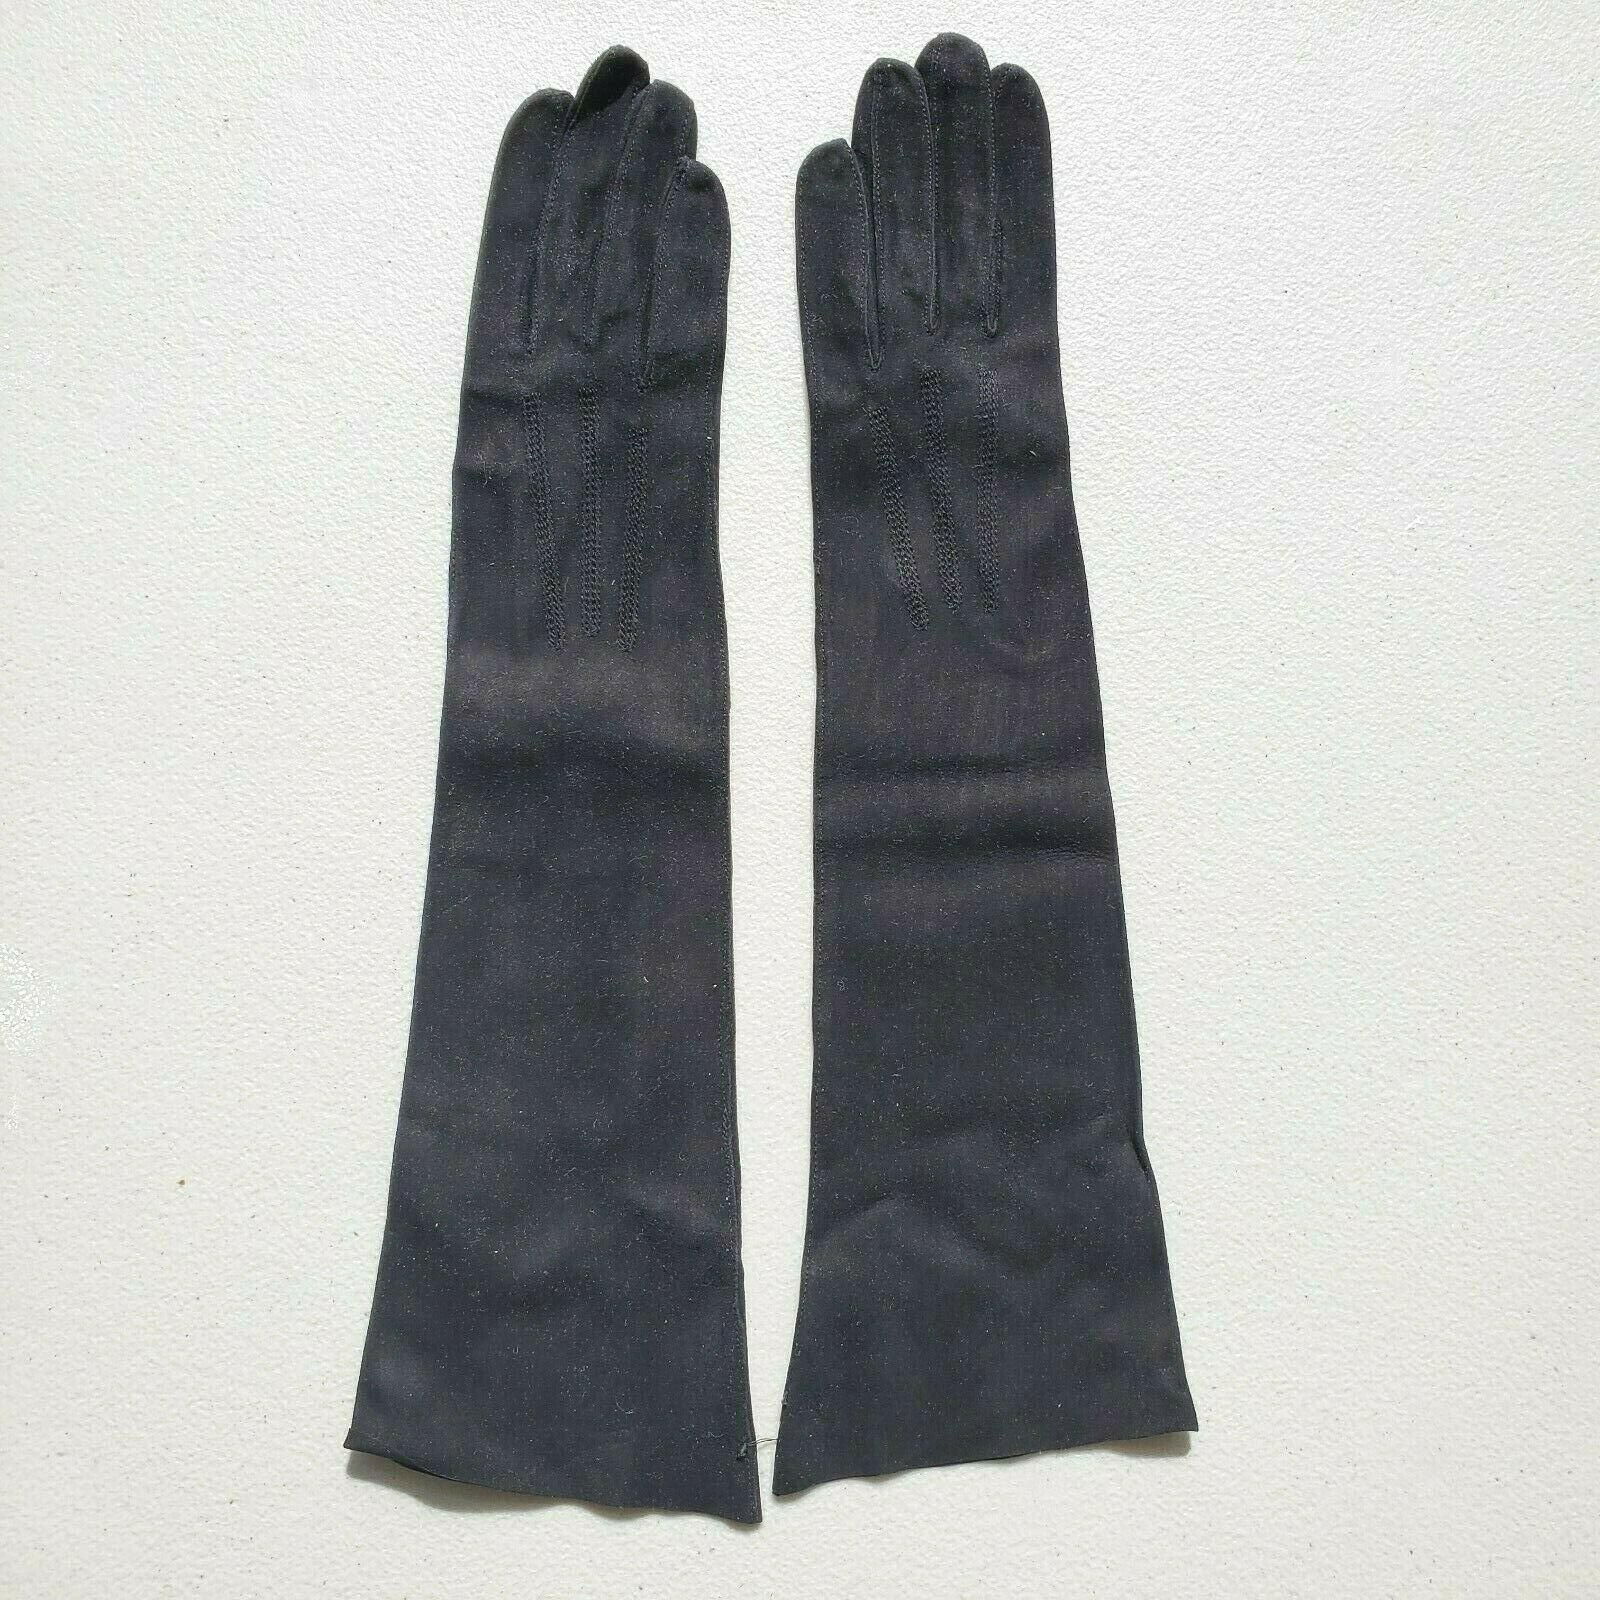 H A &e Smith Ltd Bermuda Black Leather Gloves  Size 6.5  Made In France